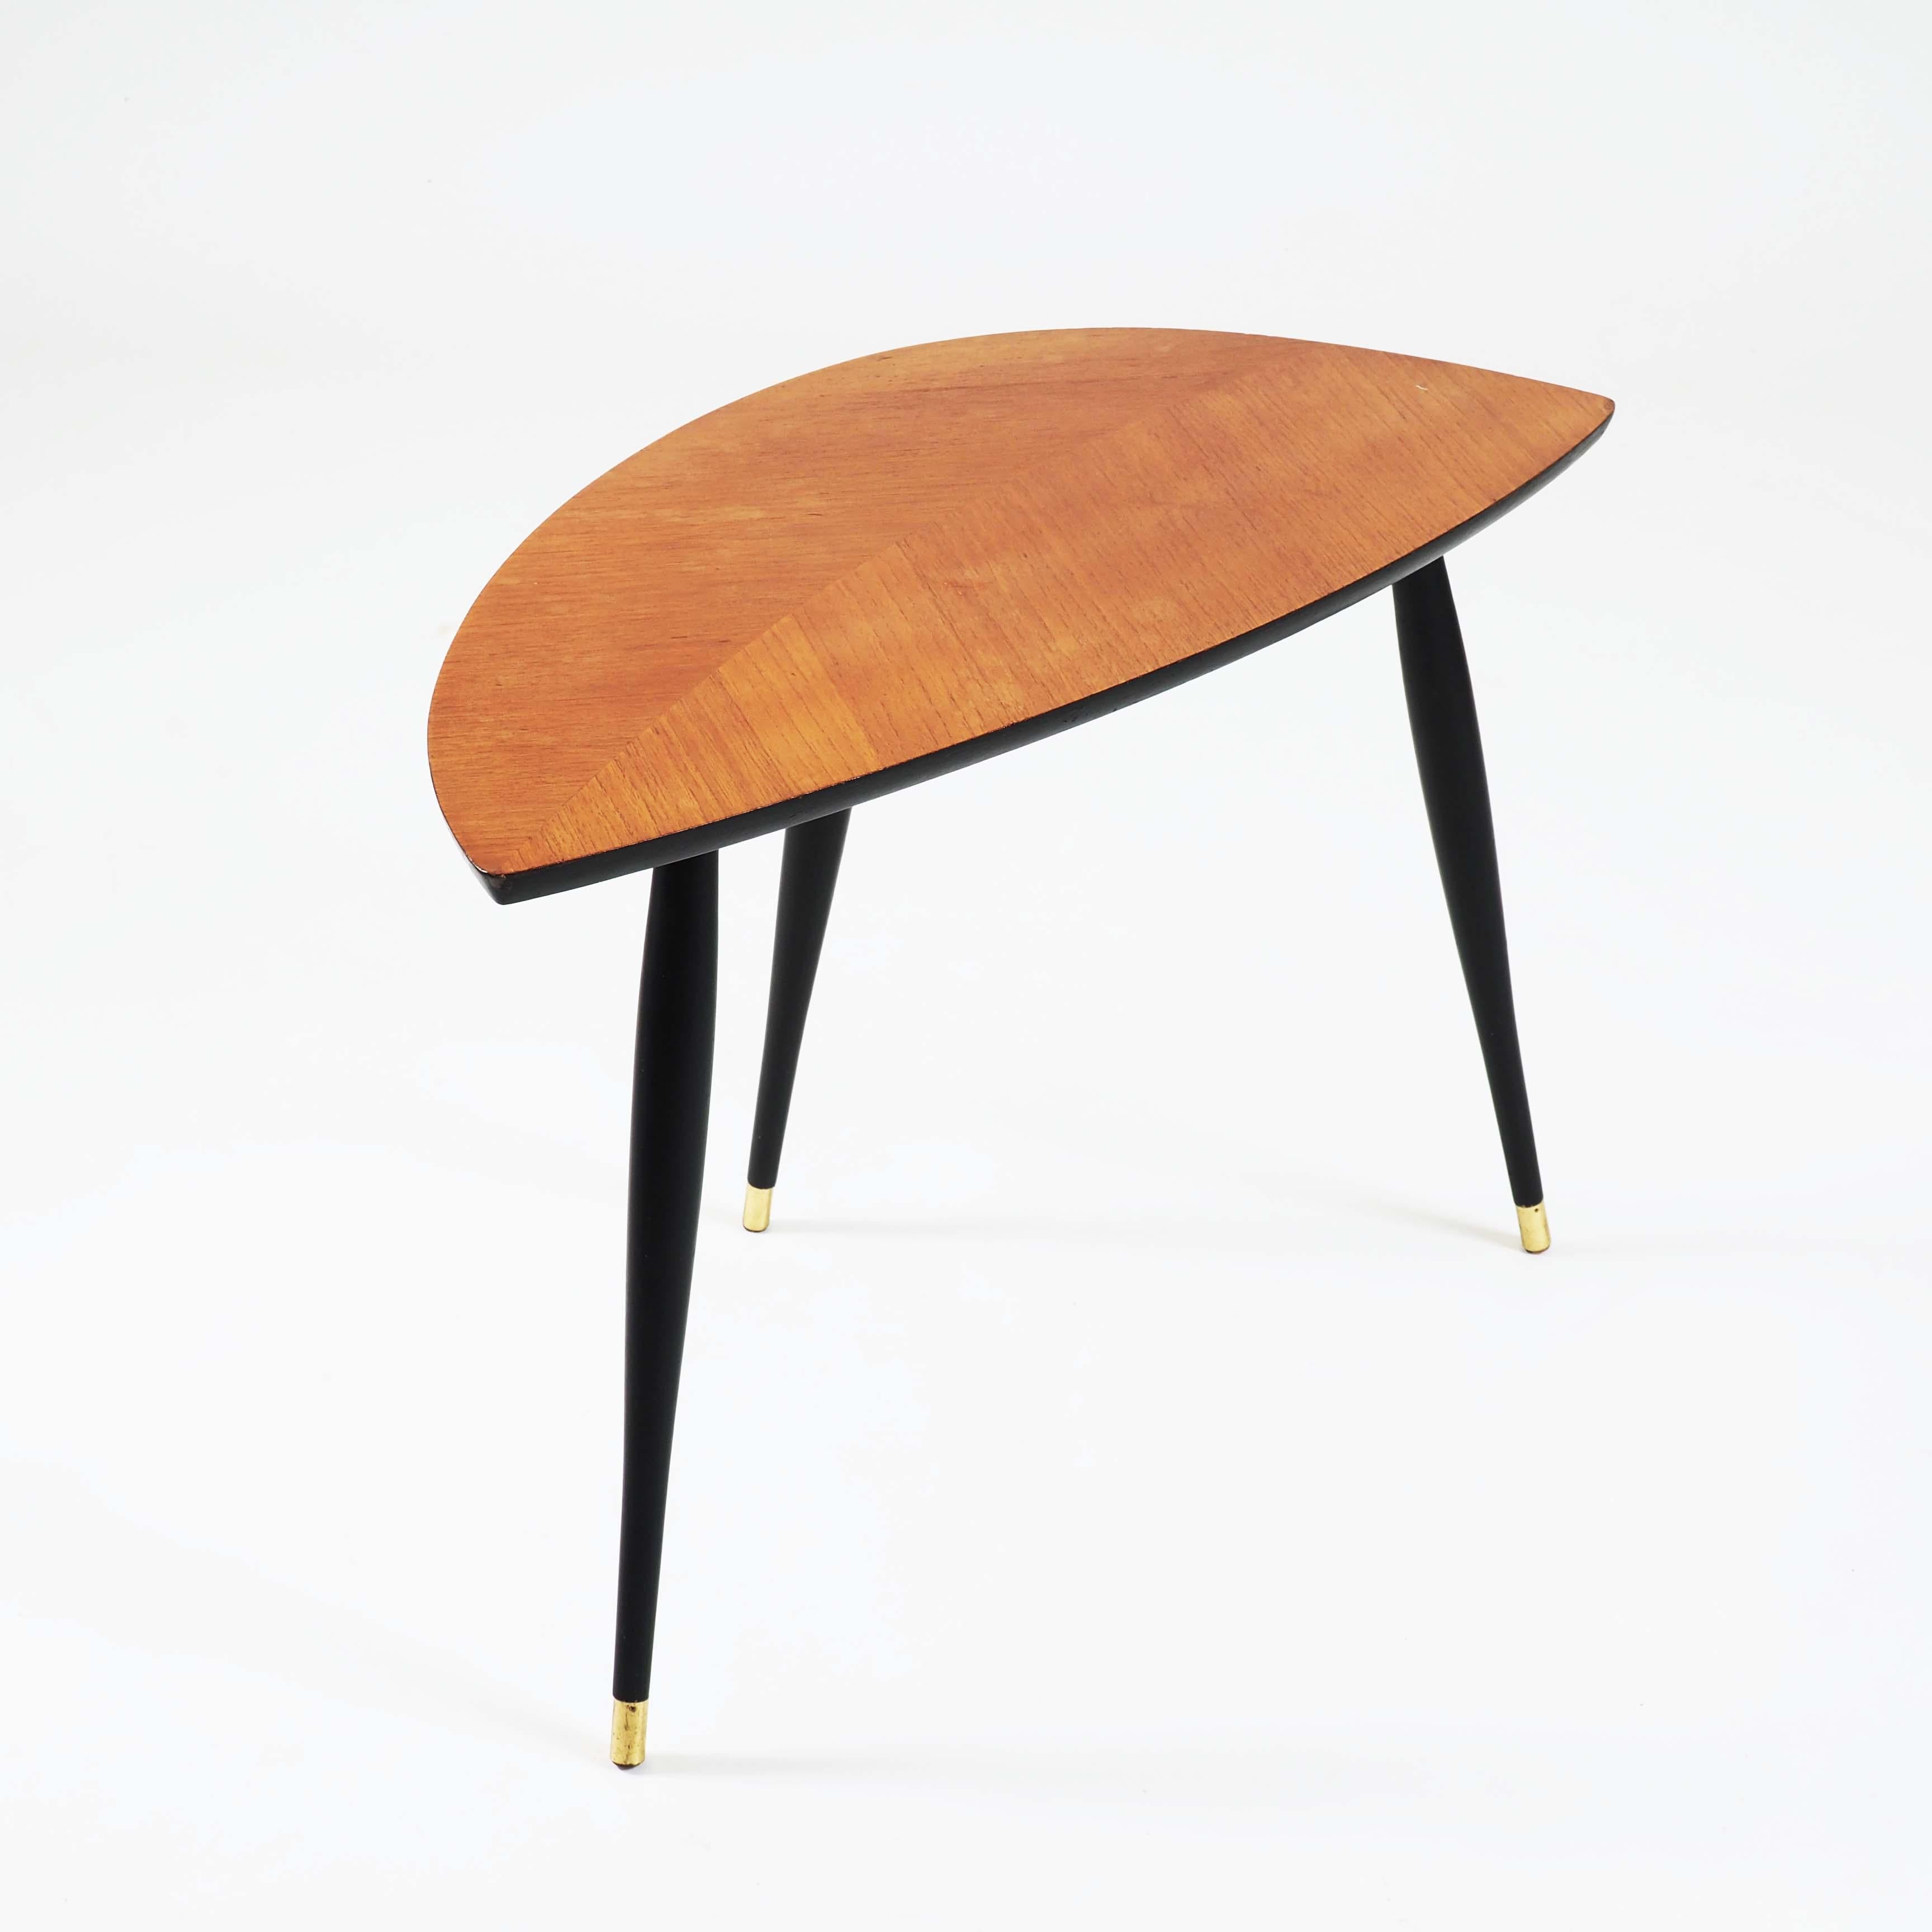 This table was one of the first designs sold by Ikea in a flat package. Who could then know what that would lead to? It is made with mirror-laid teak finer and black painted legs.